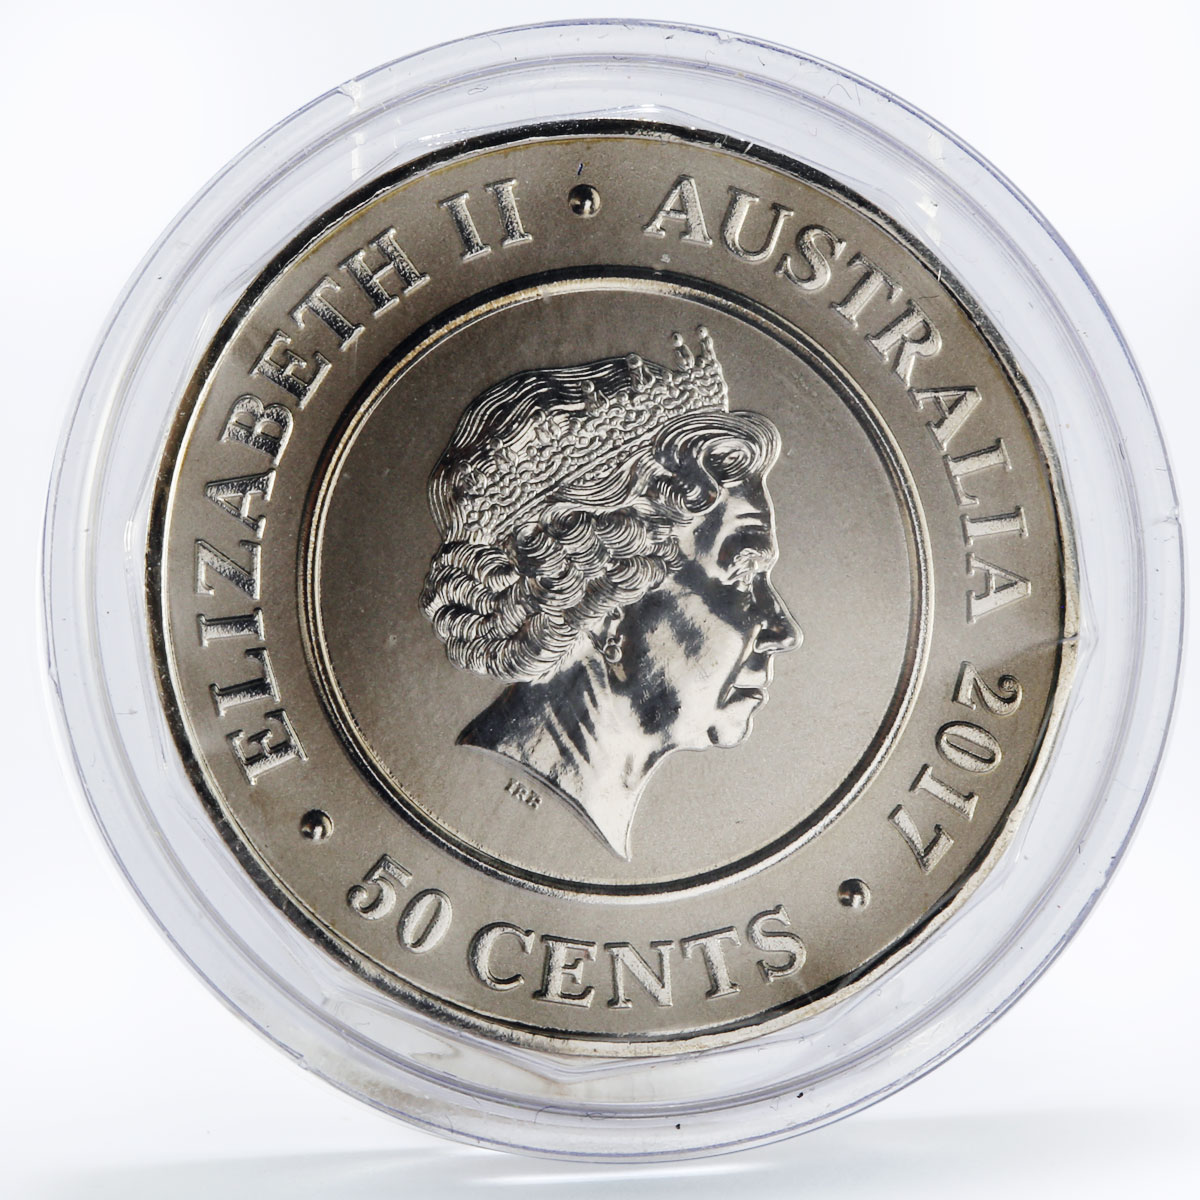 Australia 50 cents Planetary Coins series Jupiter nickel coin 2017